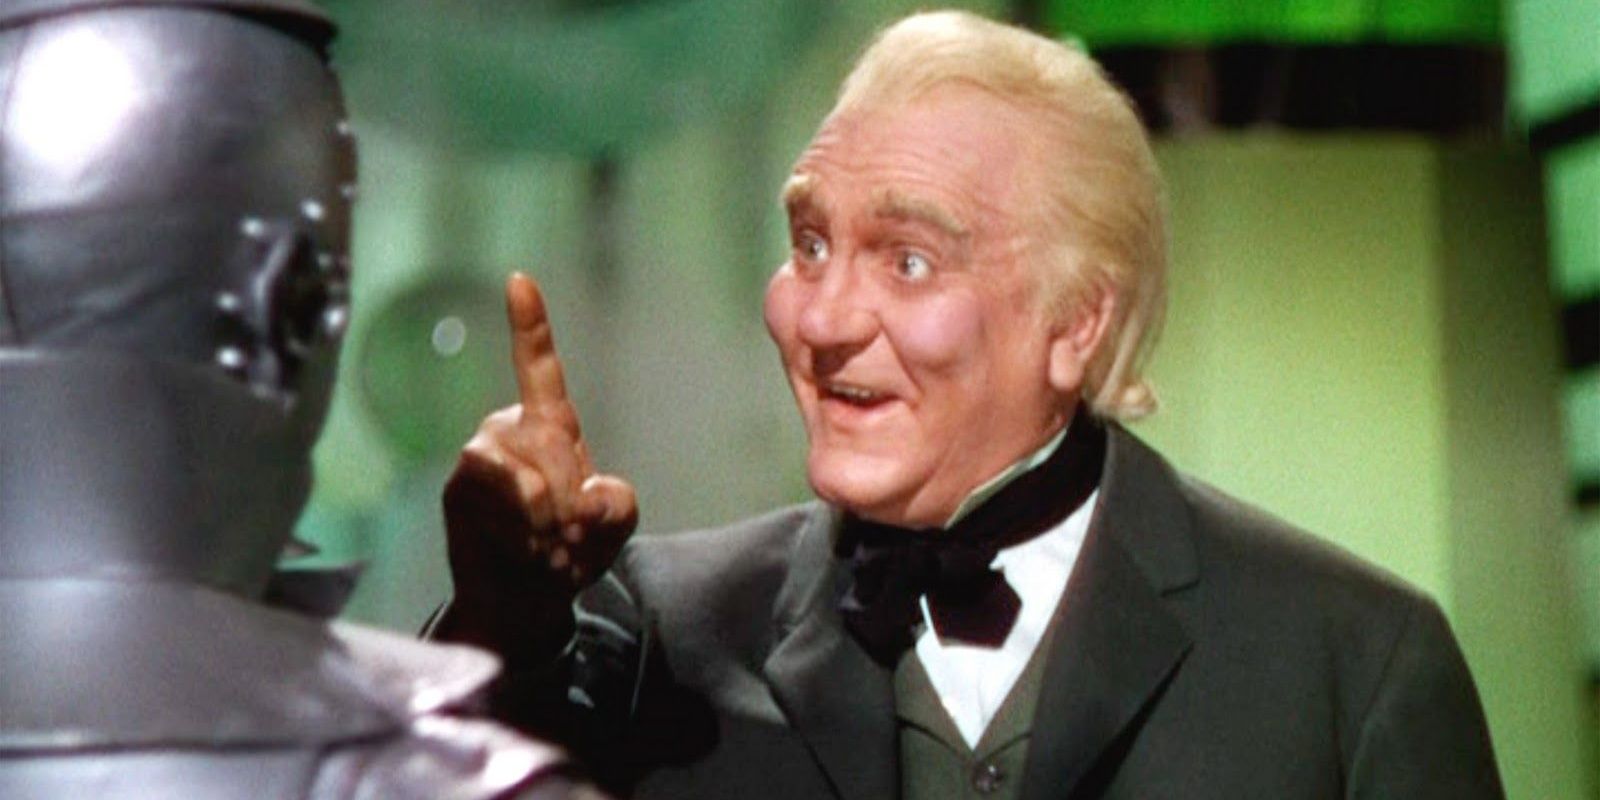 Frank Morgan as The Wizard from the Wizard of Oz (1939)